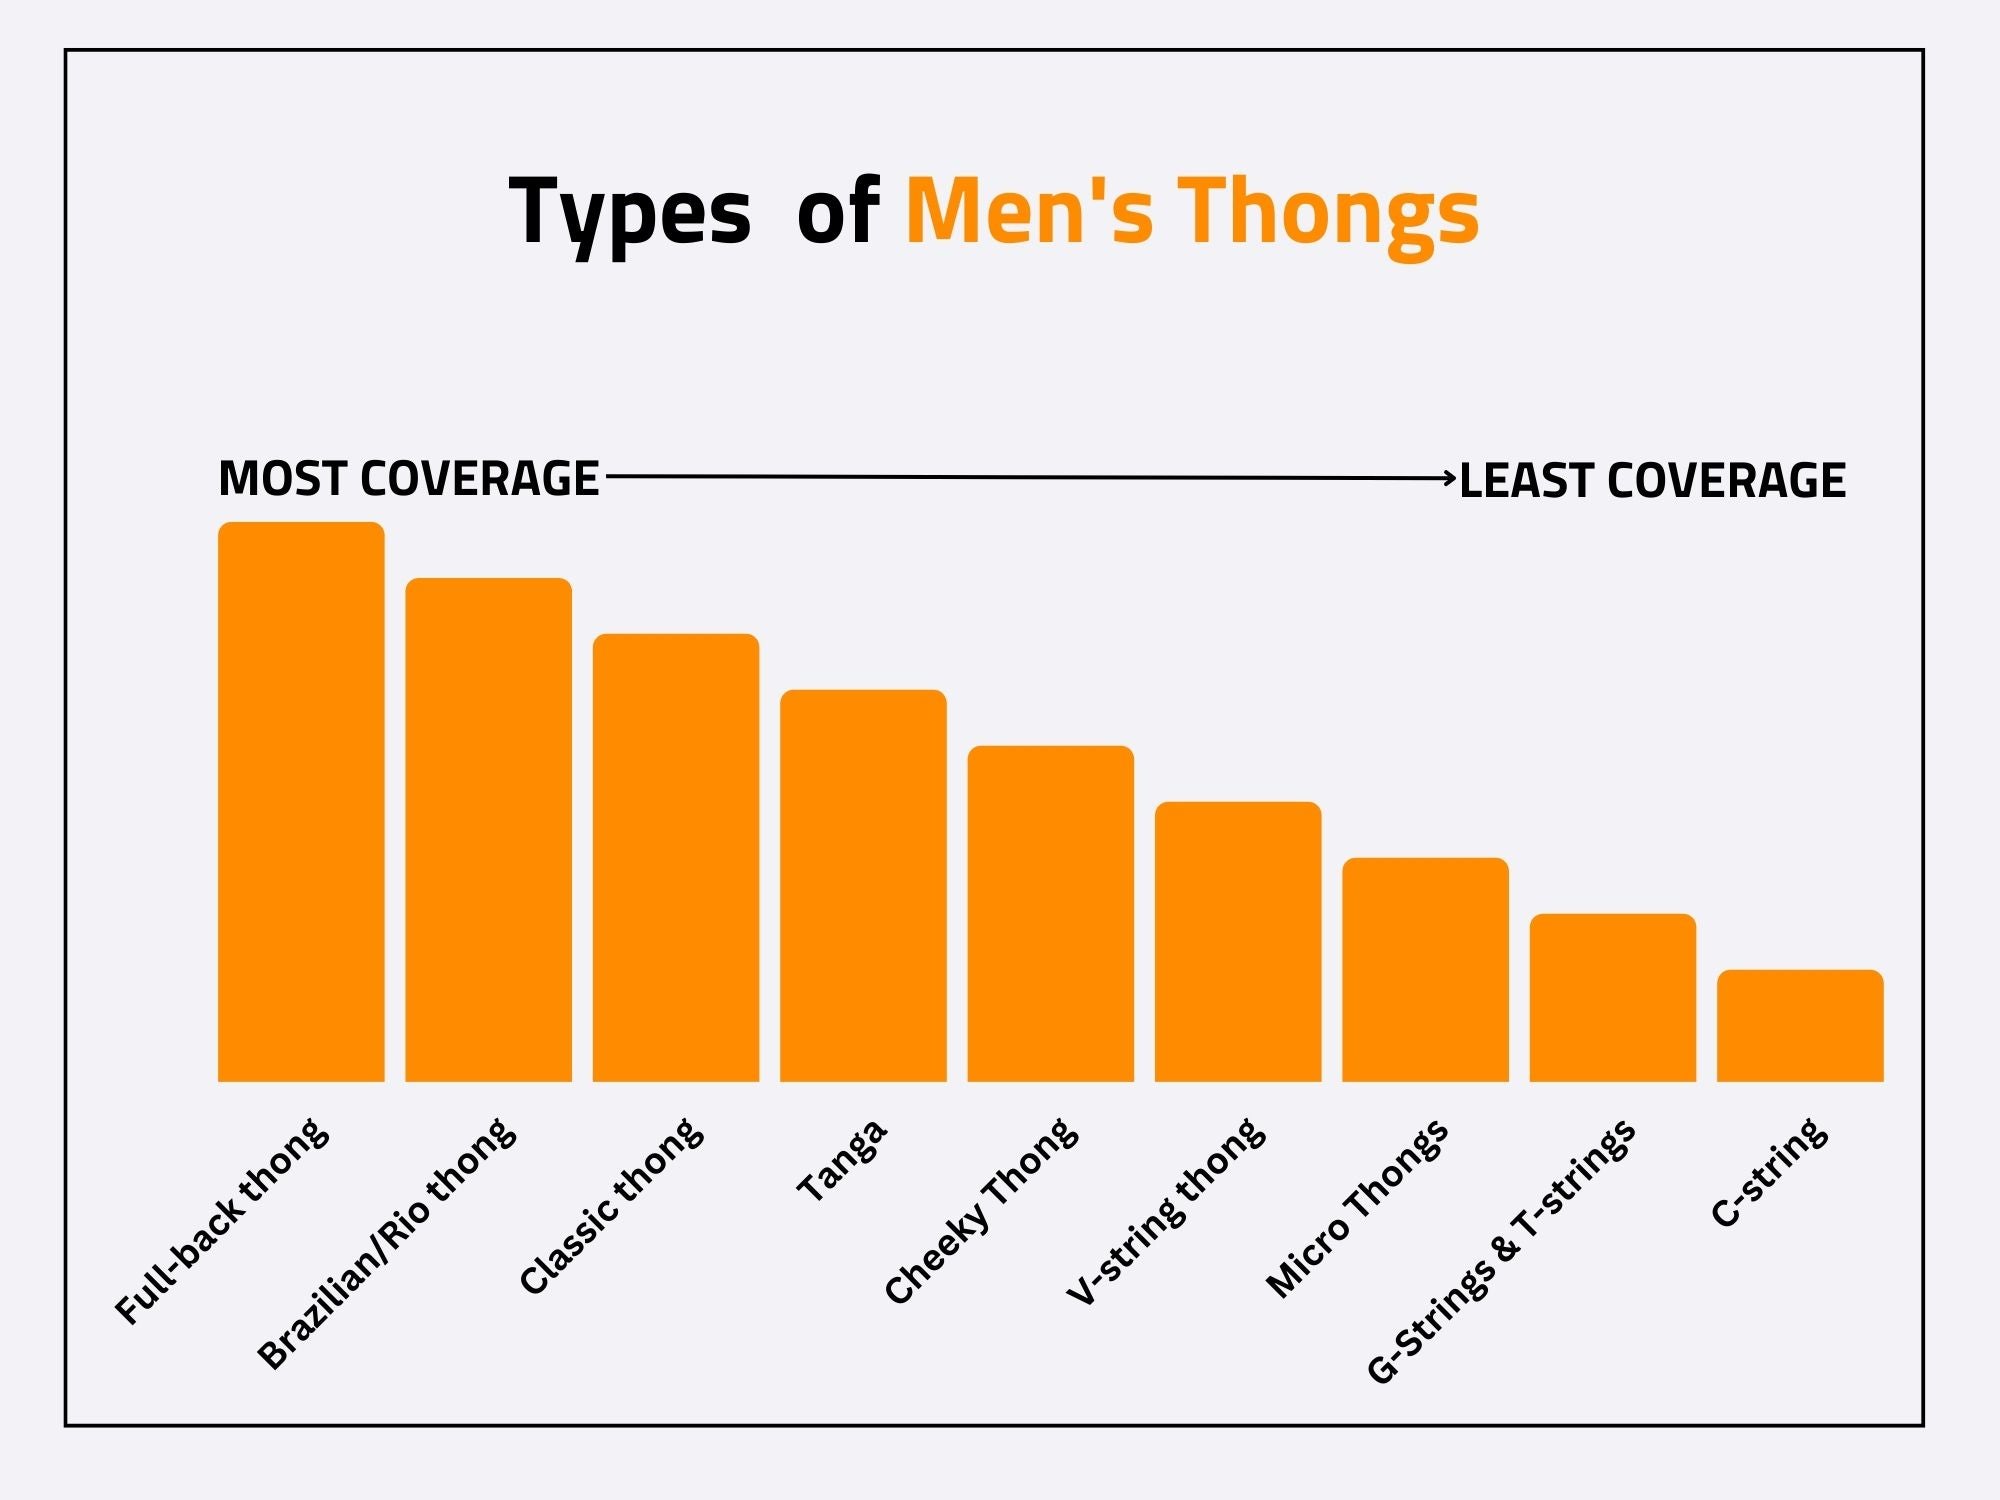 Men's Thongs ranked by coverage